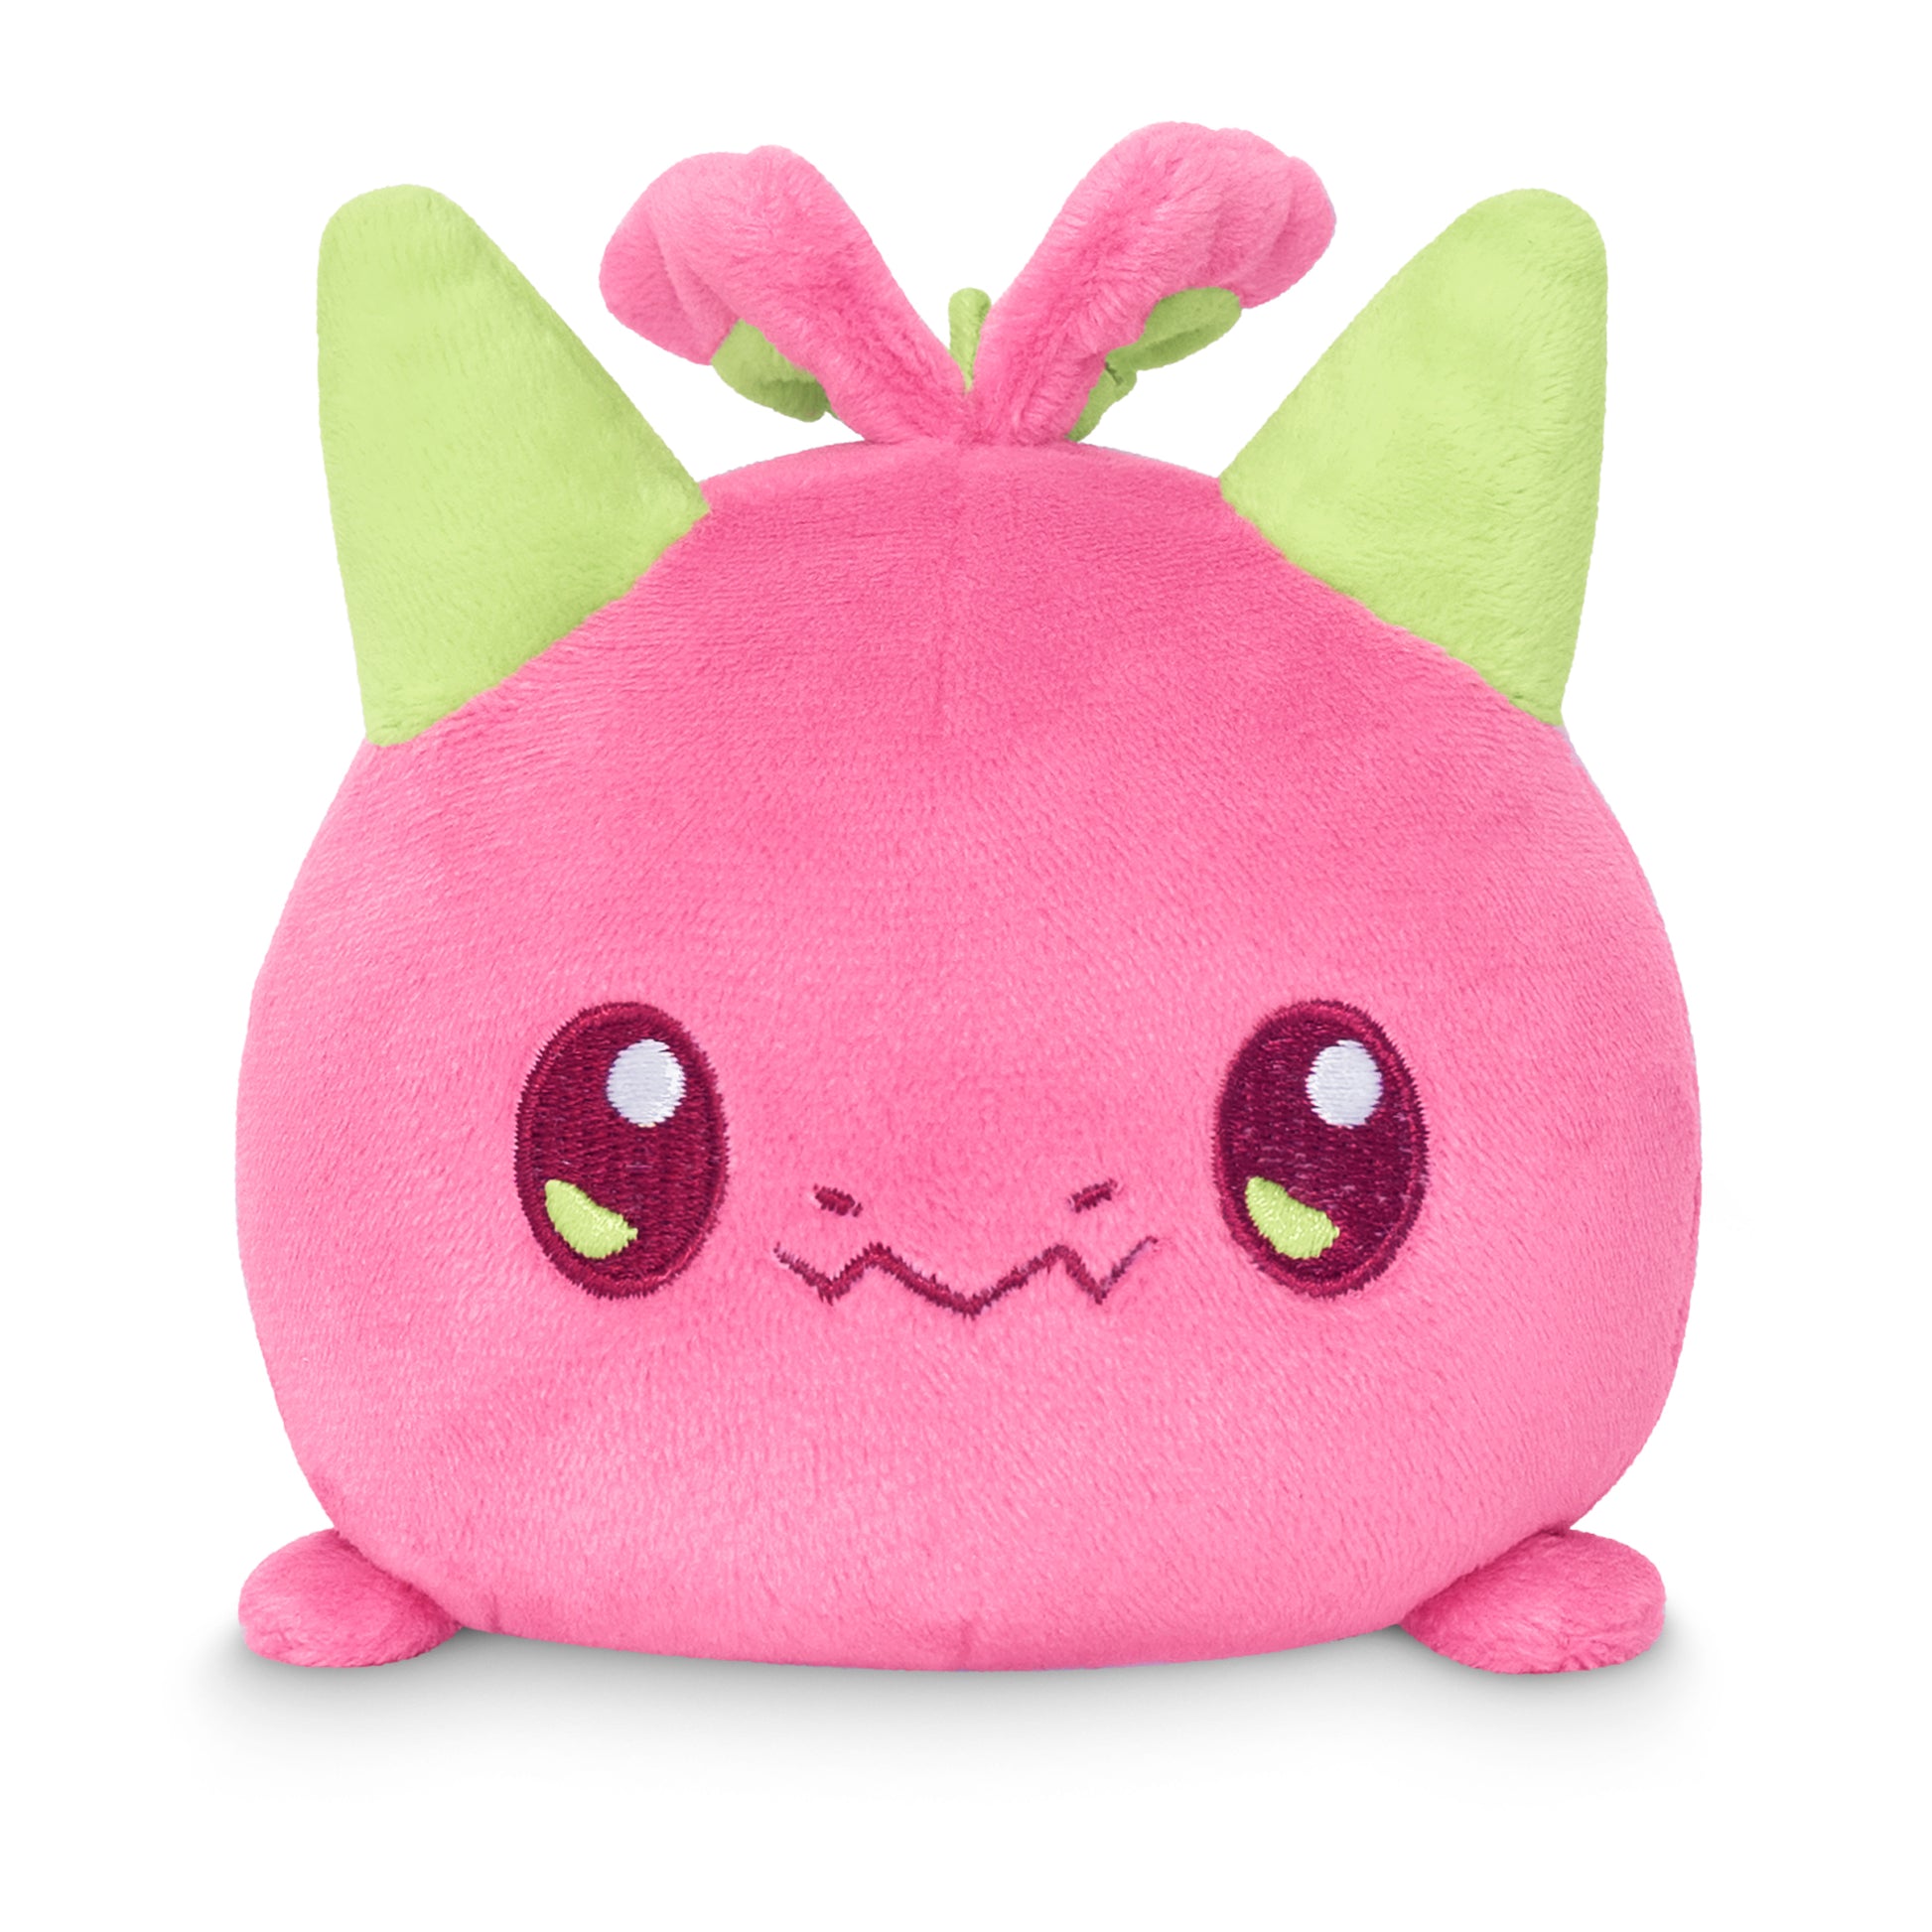 A Plushiverse Dragon Fruit Plushie Tote Bag with green eyes made by TeeTurtle.